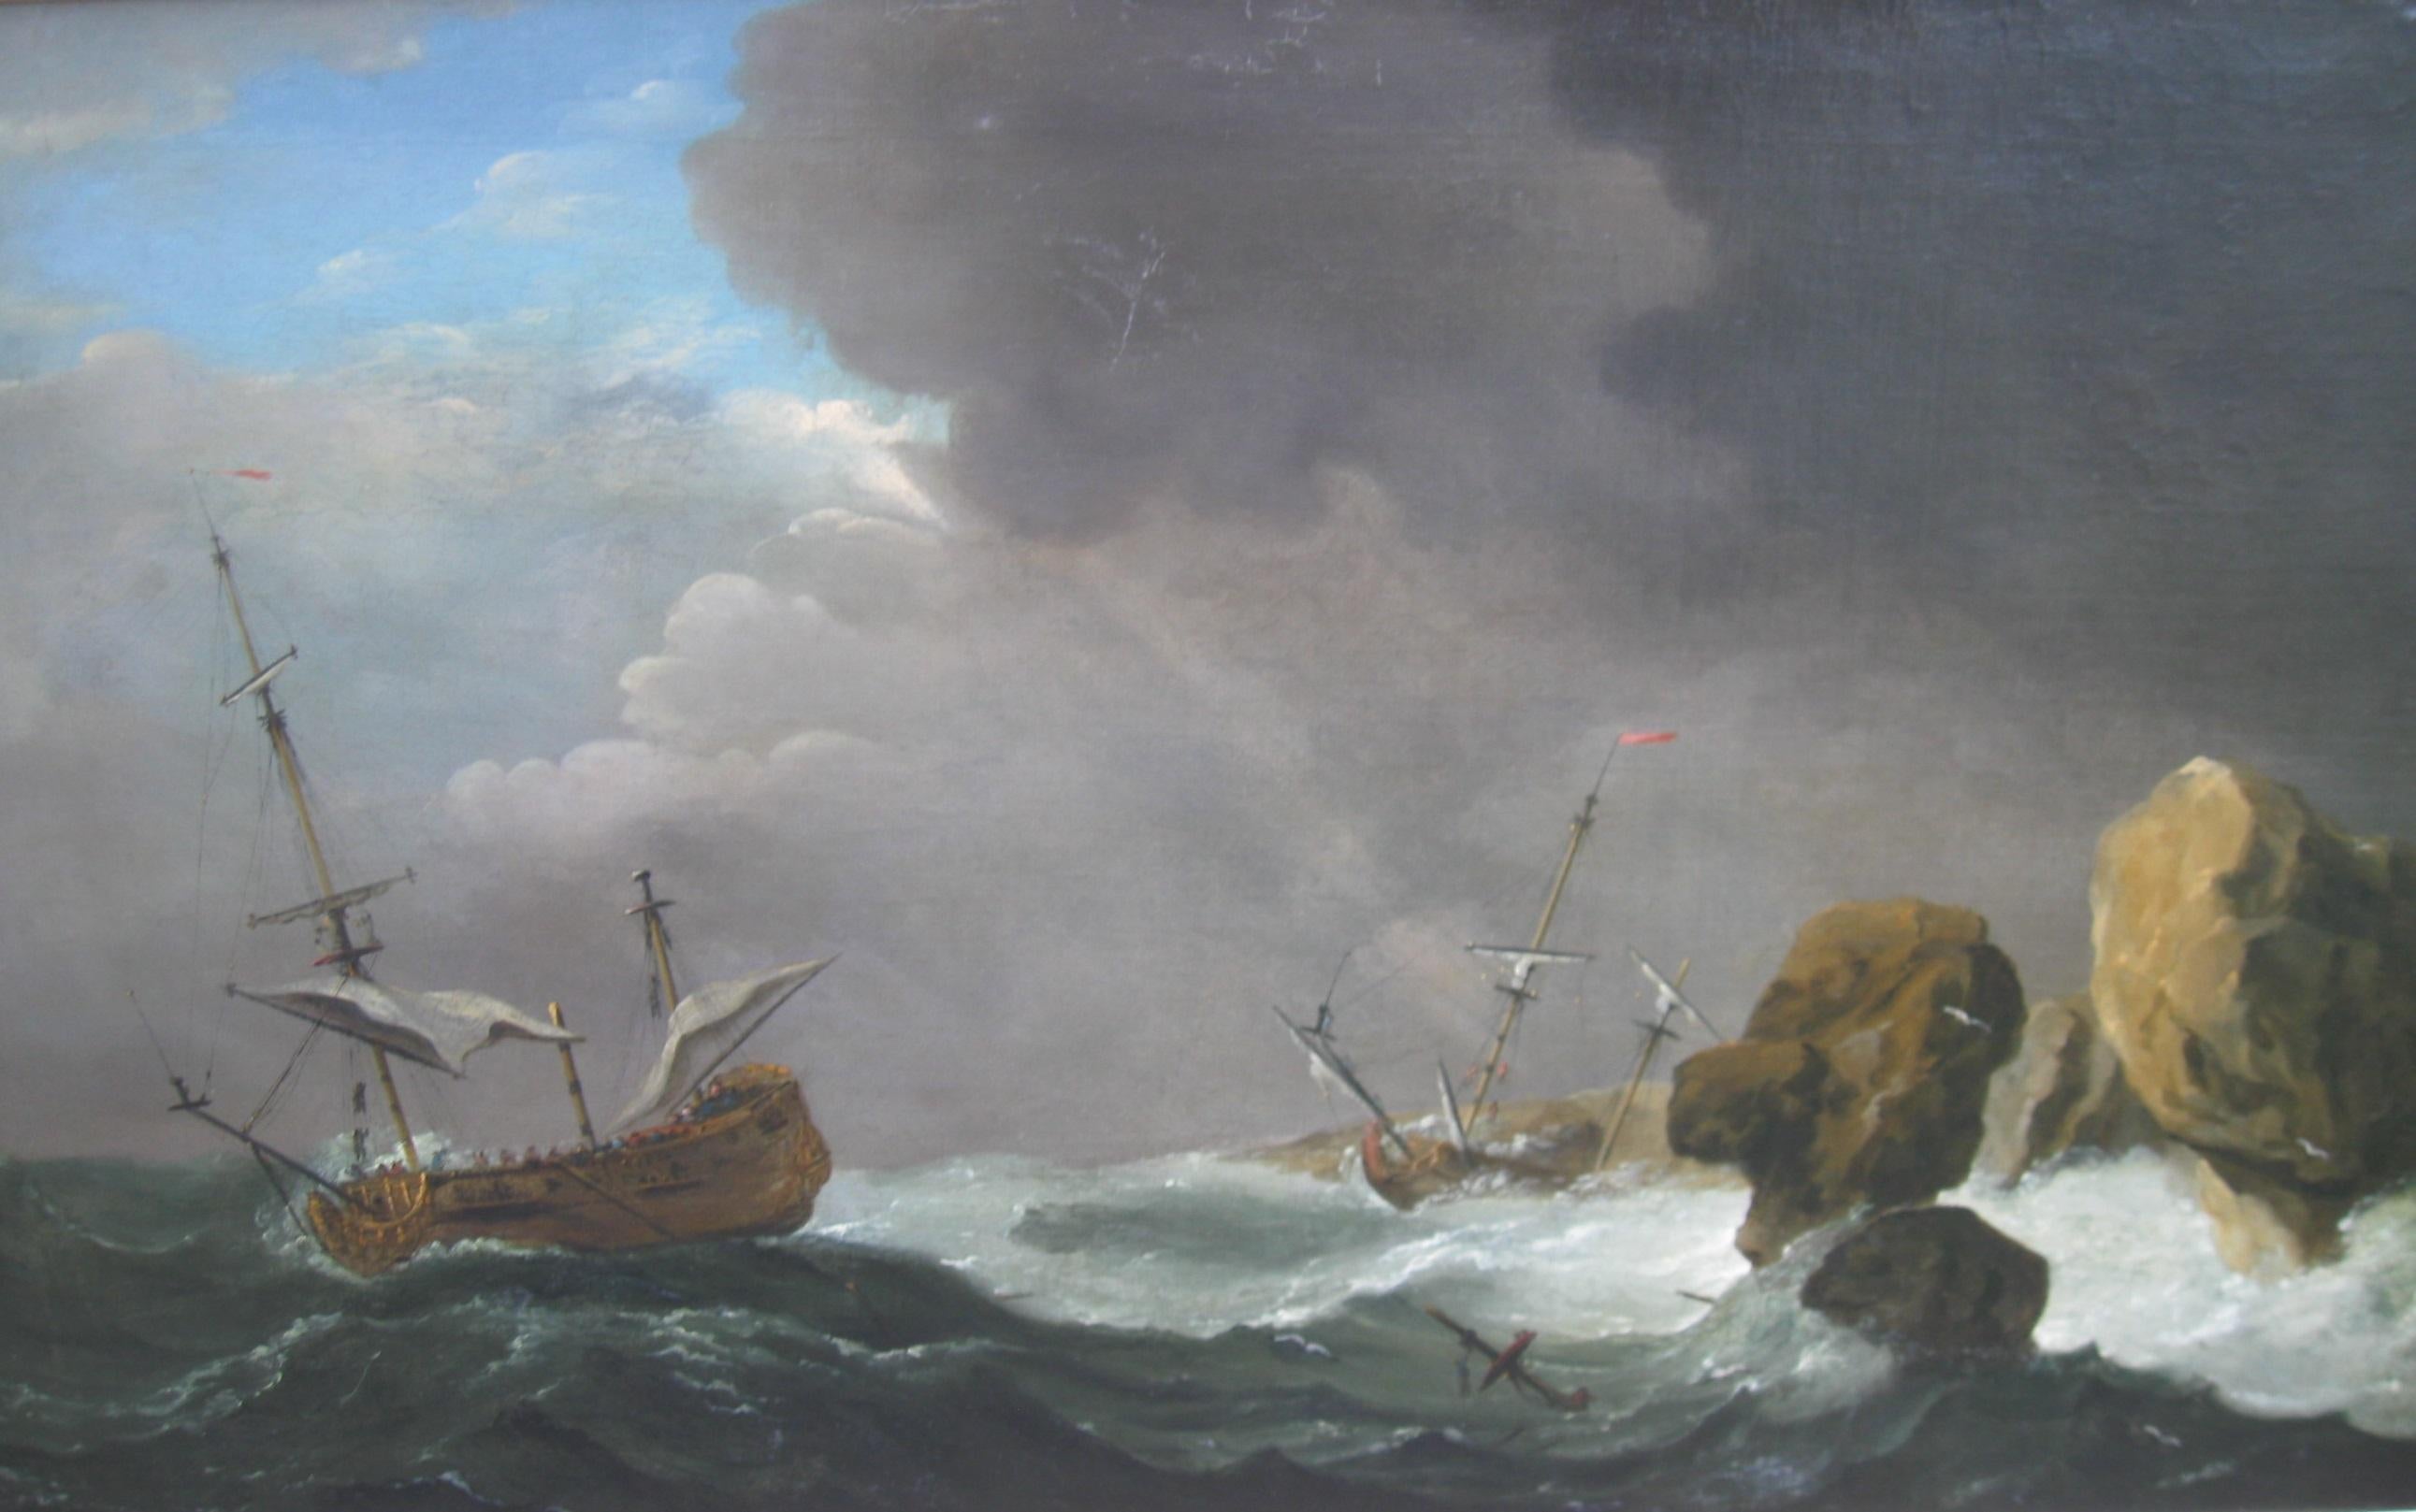 Unknown Landscape Painting - 'Ships in Distress' 18th Century Old Master Marine Seascape oil on canvas c1750